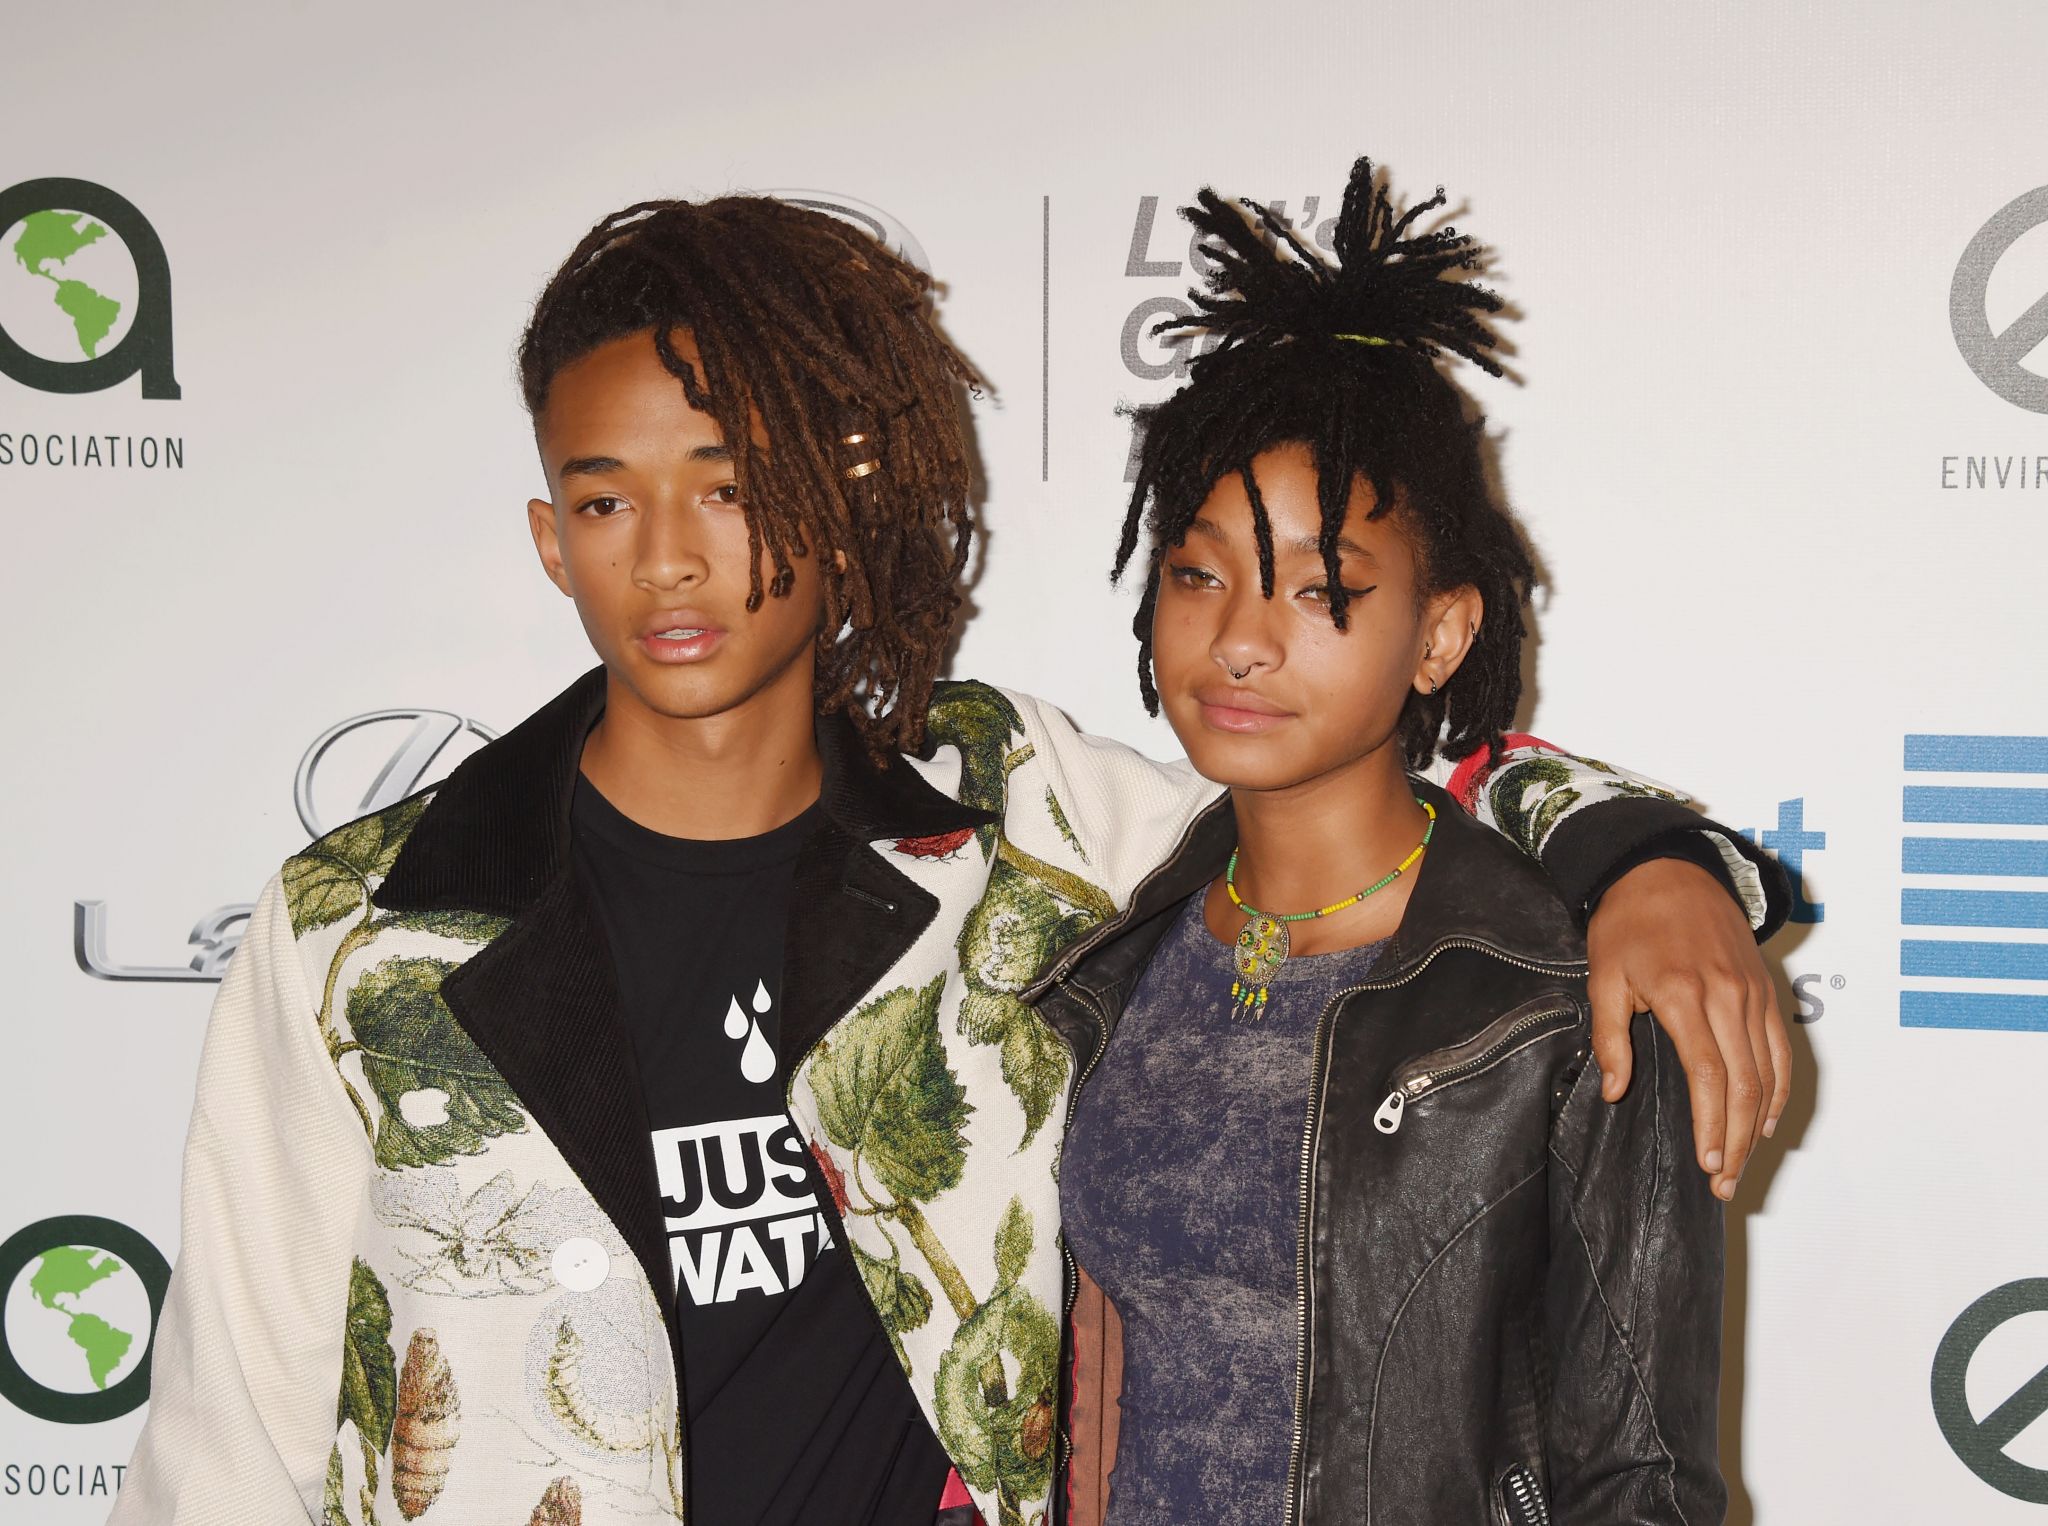 Willow and Jaden Smith are coming to San Antonio as part of their joint